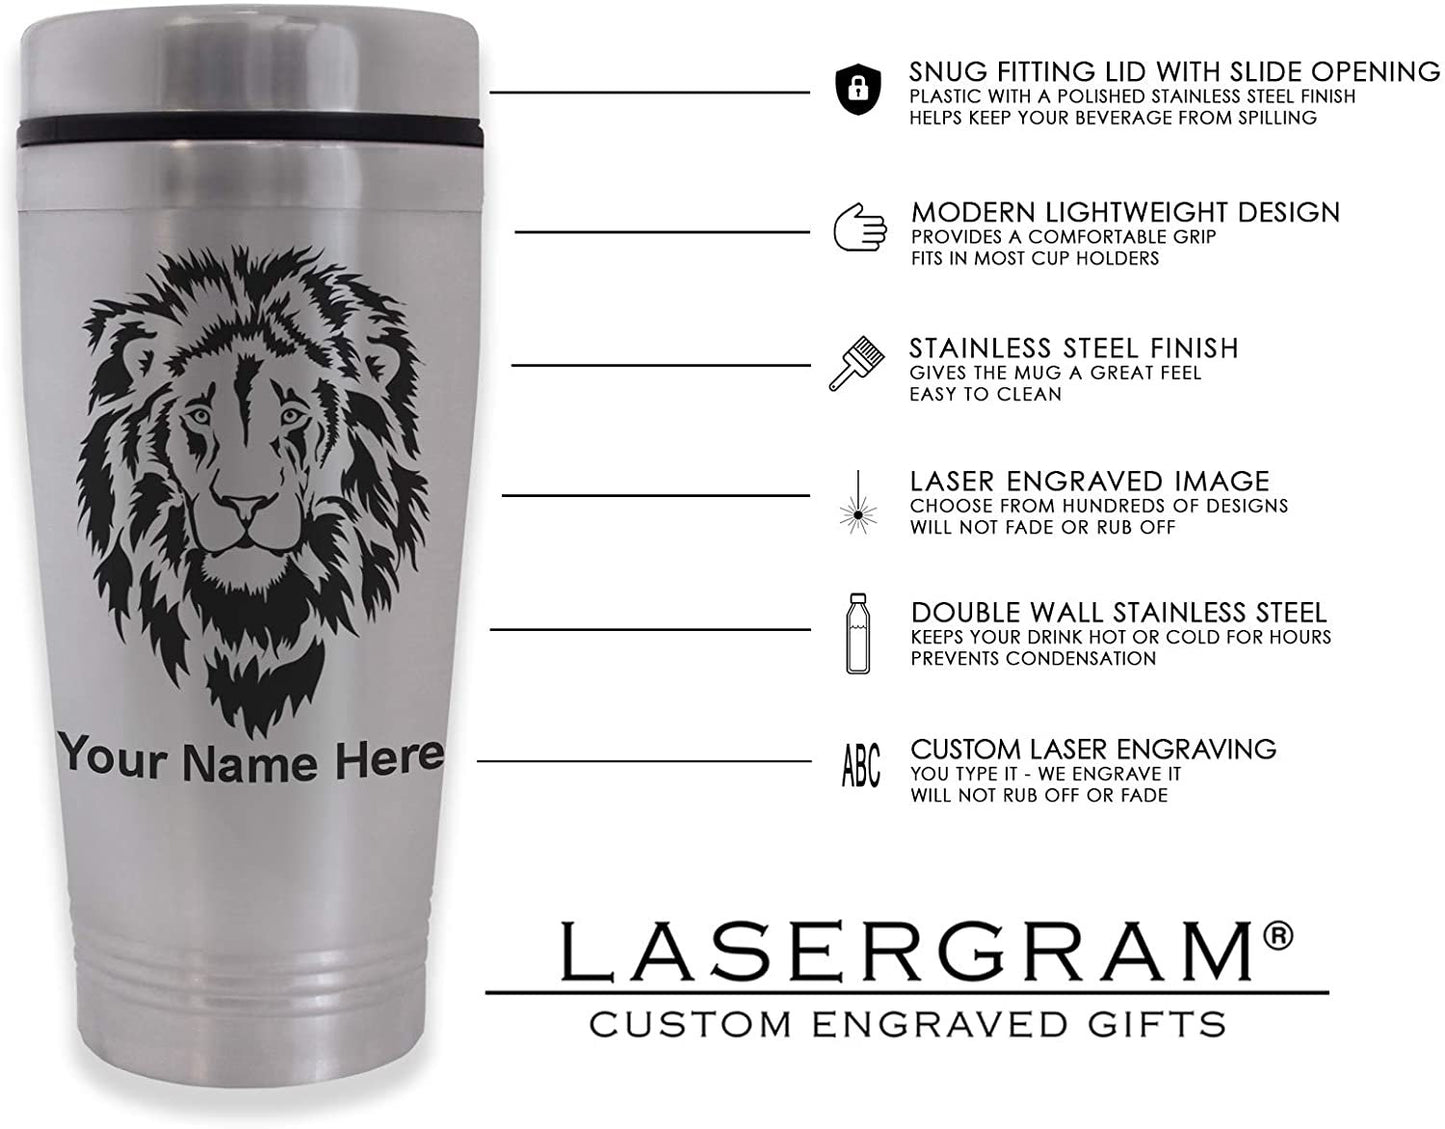 Commuter Travel Mug, Hippopotamus, Personalized Engraving Included